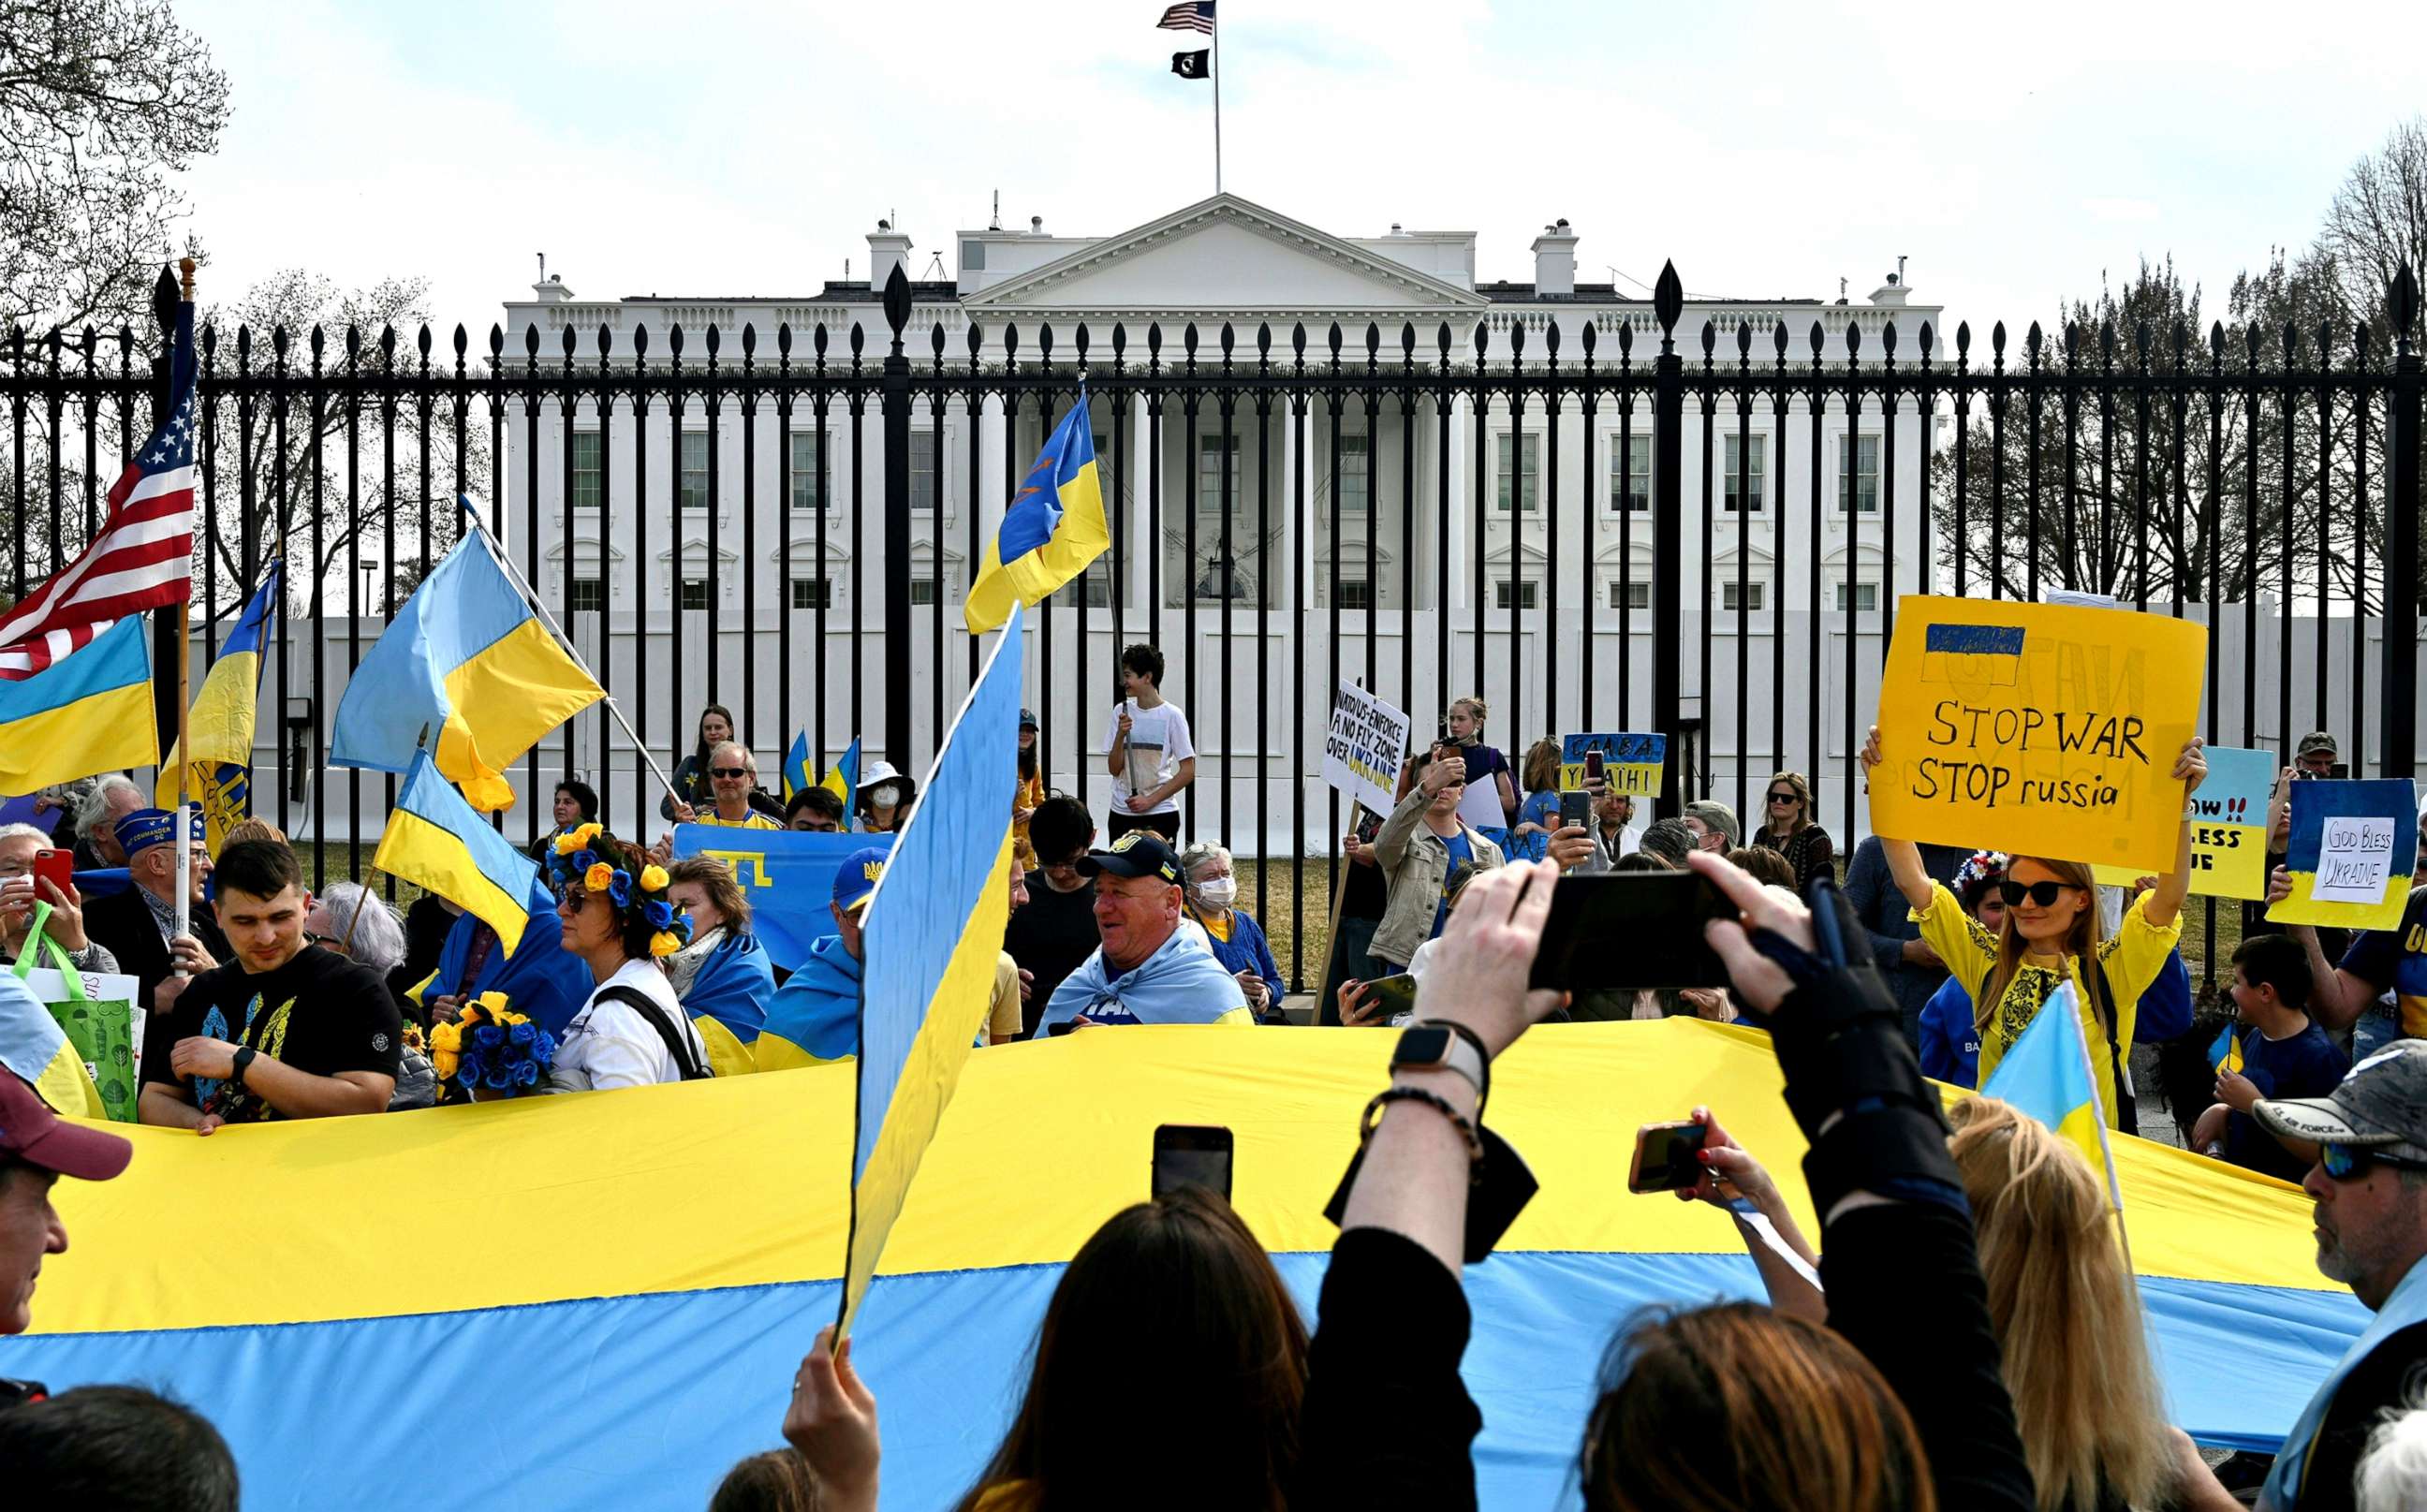 PHOTO: Supporters hold up signs and Ukrainian flags during a rally protesting the Russian invasion of Ukraine at Lafayette Square across the White House in Washington, D.C., March 6, 2022. 